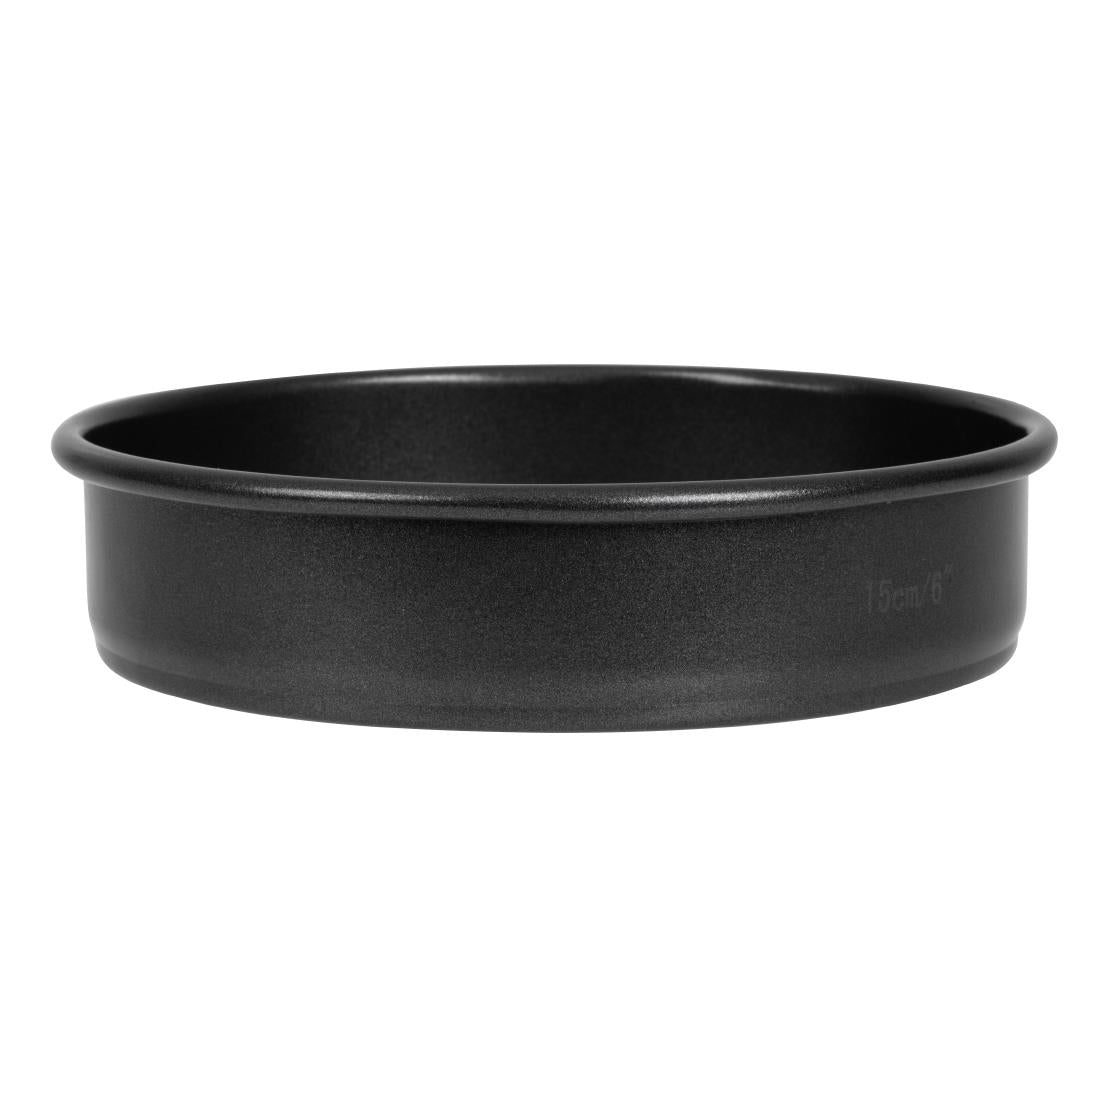 FC356 Masterclass Non-Stick Loose Base Round Sandwich Pan 150mm JD Catering Equipment Solutions Ltd